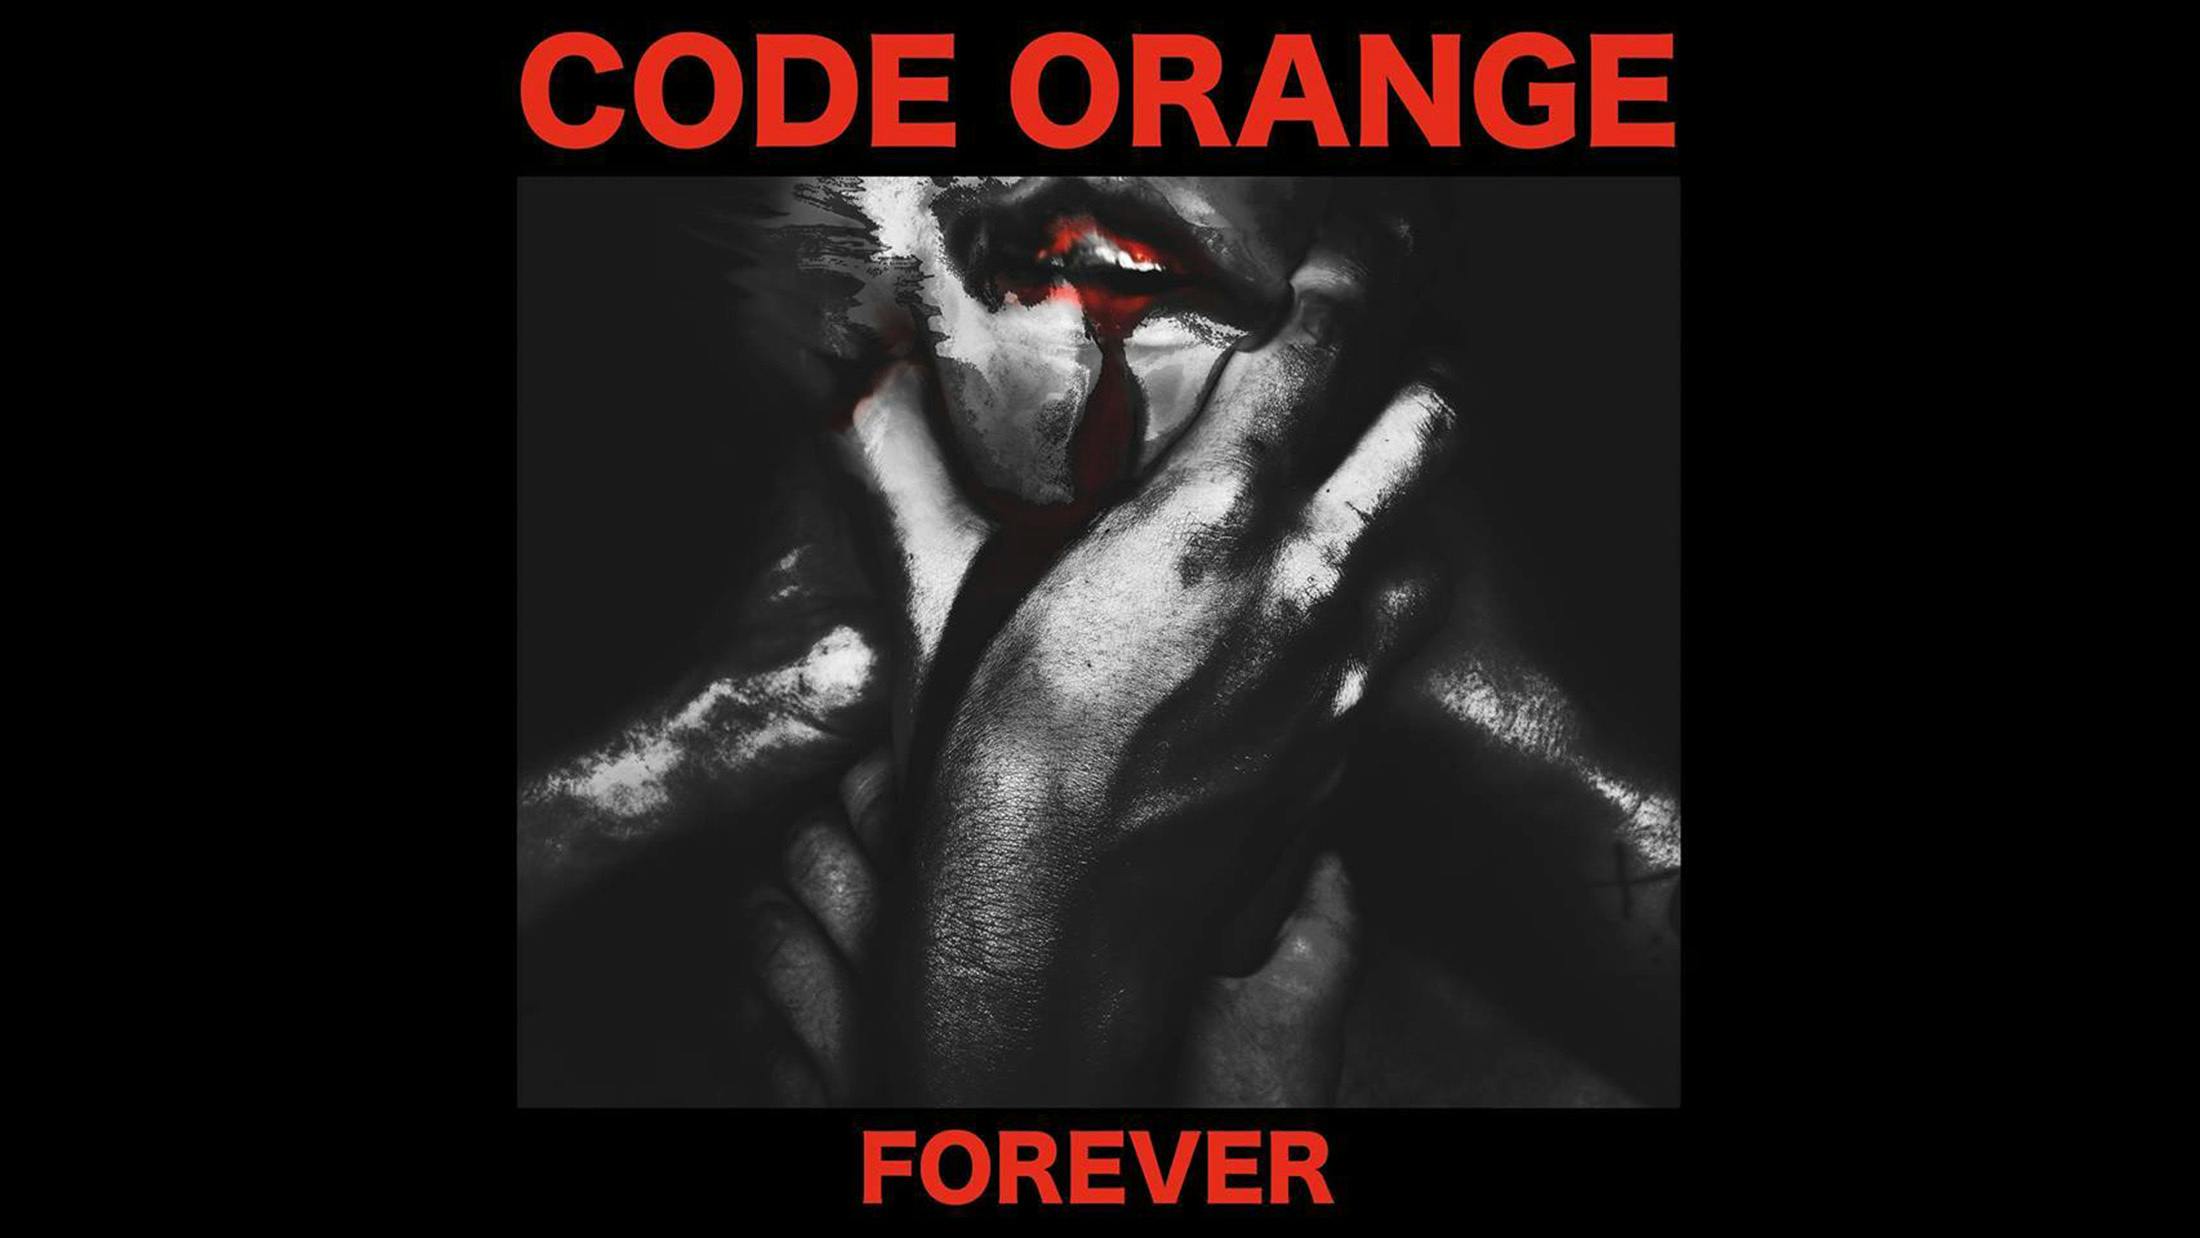 "Anticipation and excitement for Code Orange is at an all-time high worldwide amongst the press and band communities alike. I look forward to seeing how CO bring it in their live shows and future releases!!"